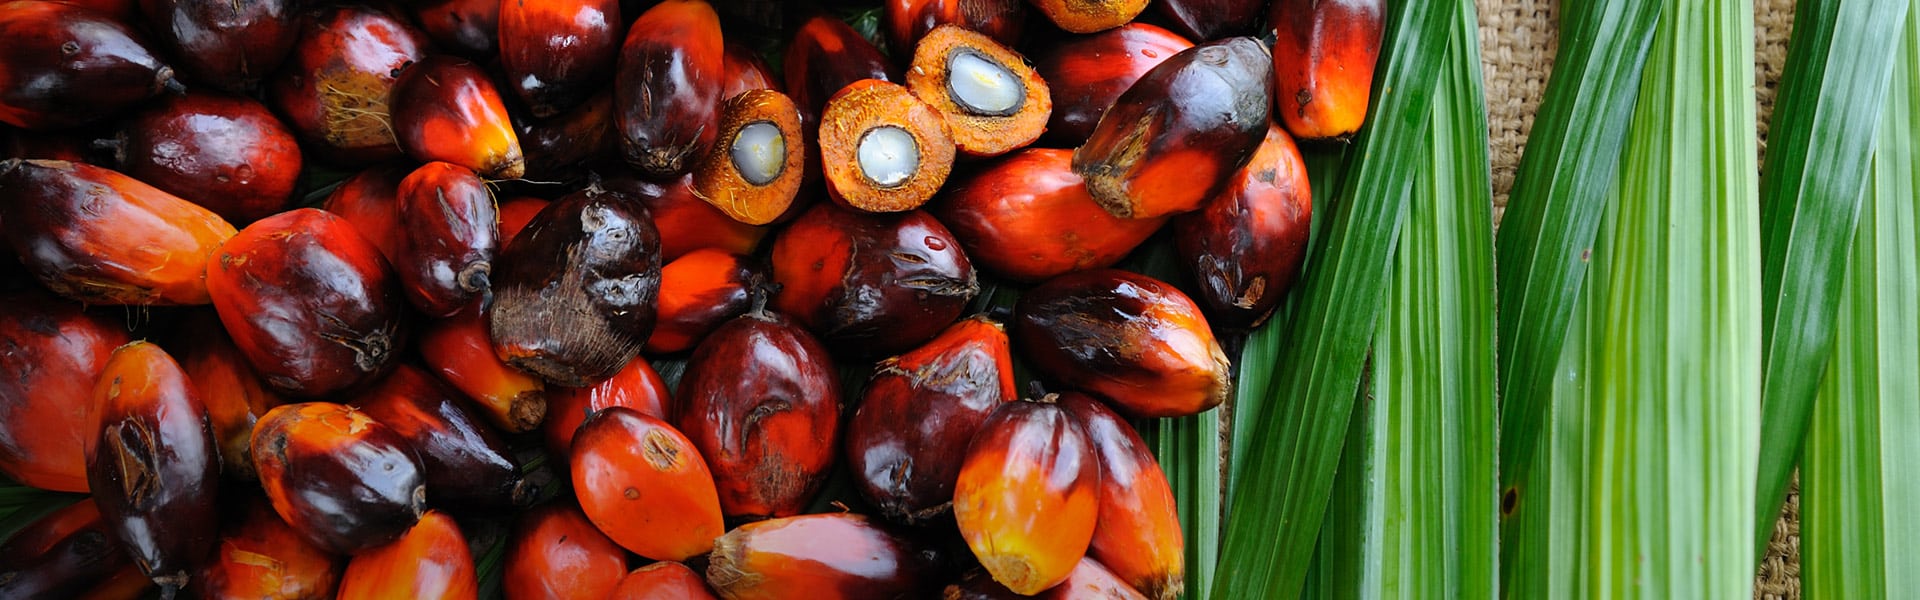 SAP and Unilever Pilot Blockchain Technology to Support Deforestation-Free Palm Oil